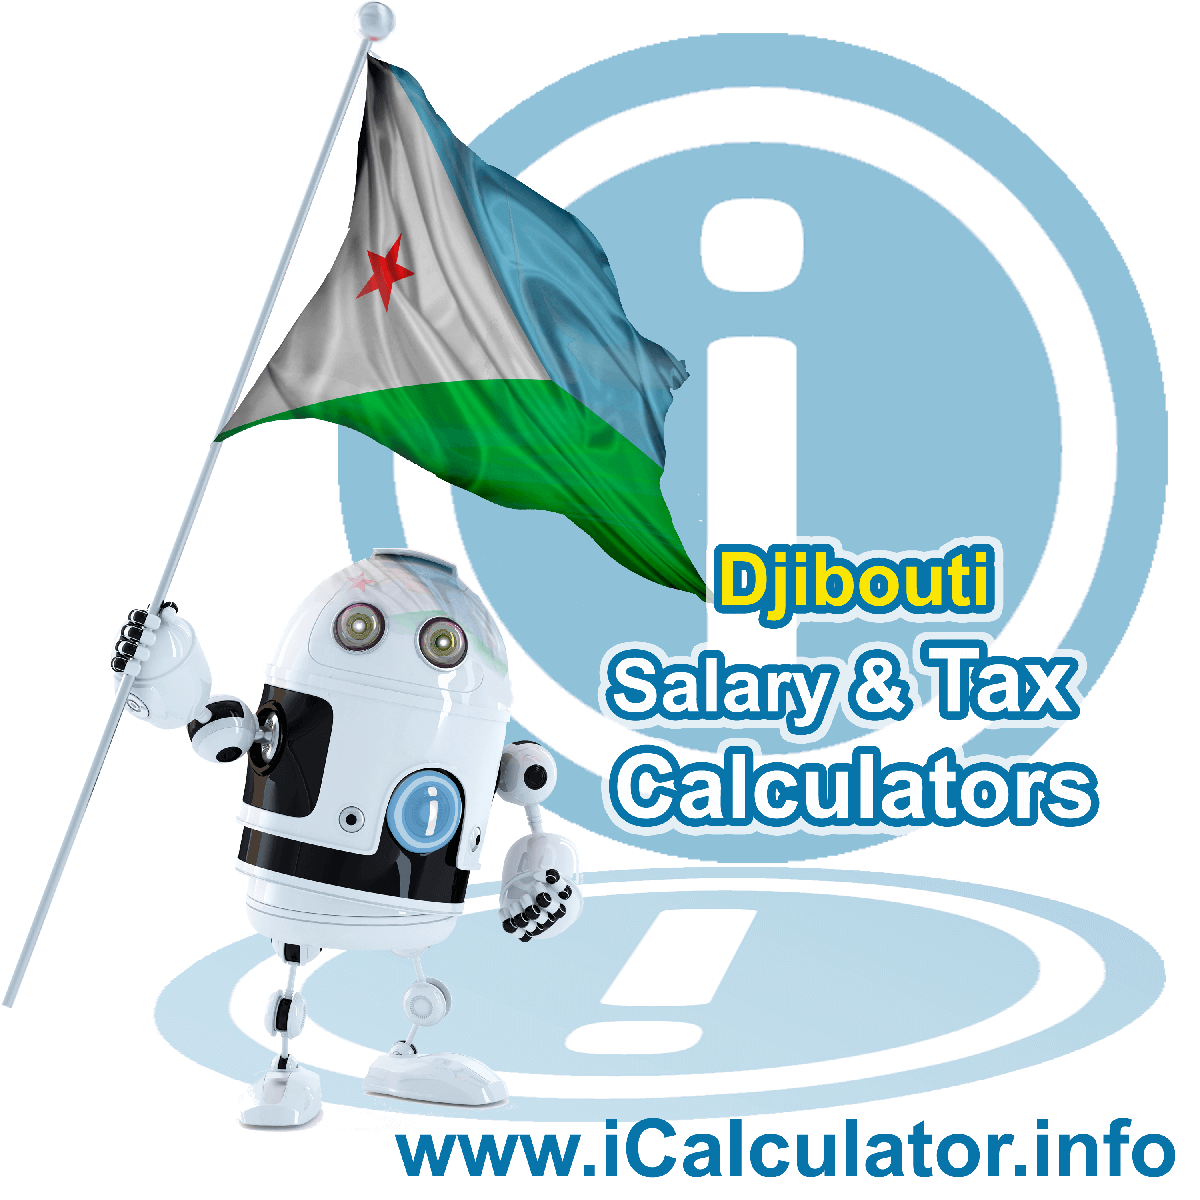 Djibouti Tax Calculator. This image shows the Djibouti flag and information relating to the tax formula for the Djibouti Salary Calculator